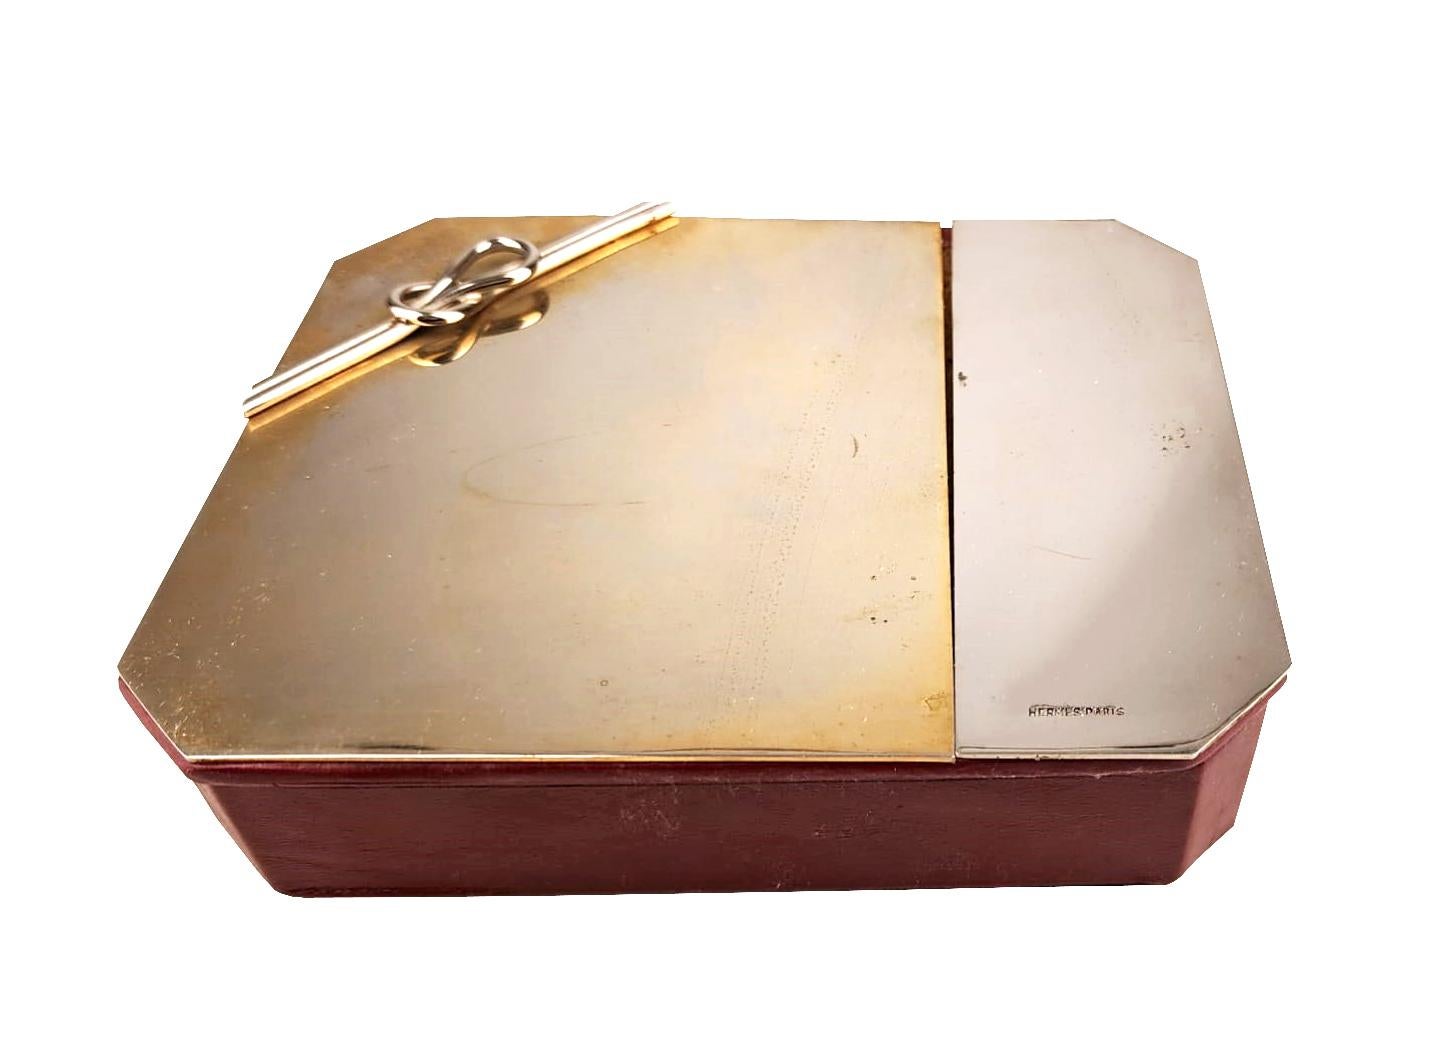 Silvered Mid-20th Century Wooden Box with Silver Knot Lid by the French Firm Hermès Paris For Sale